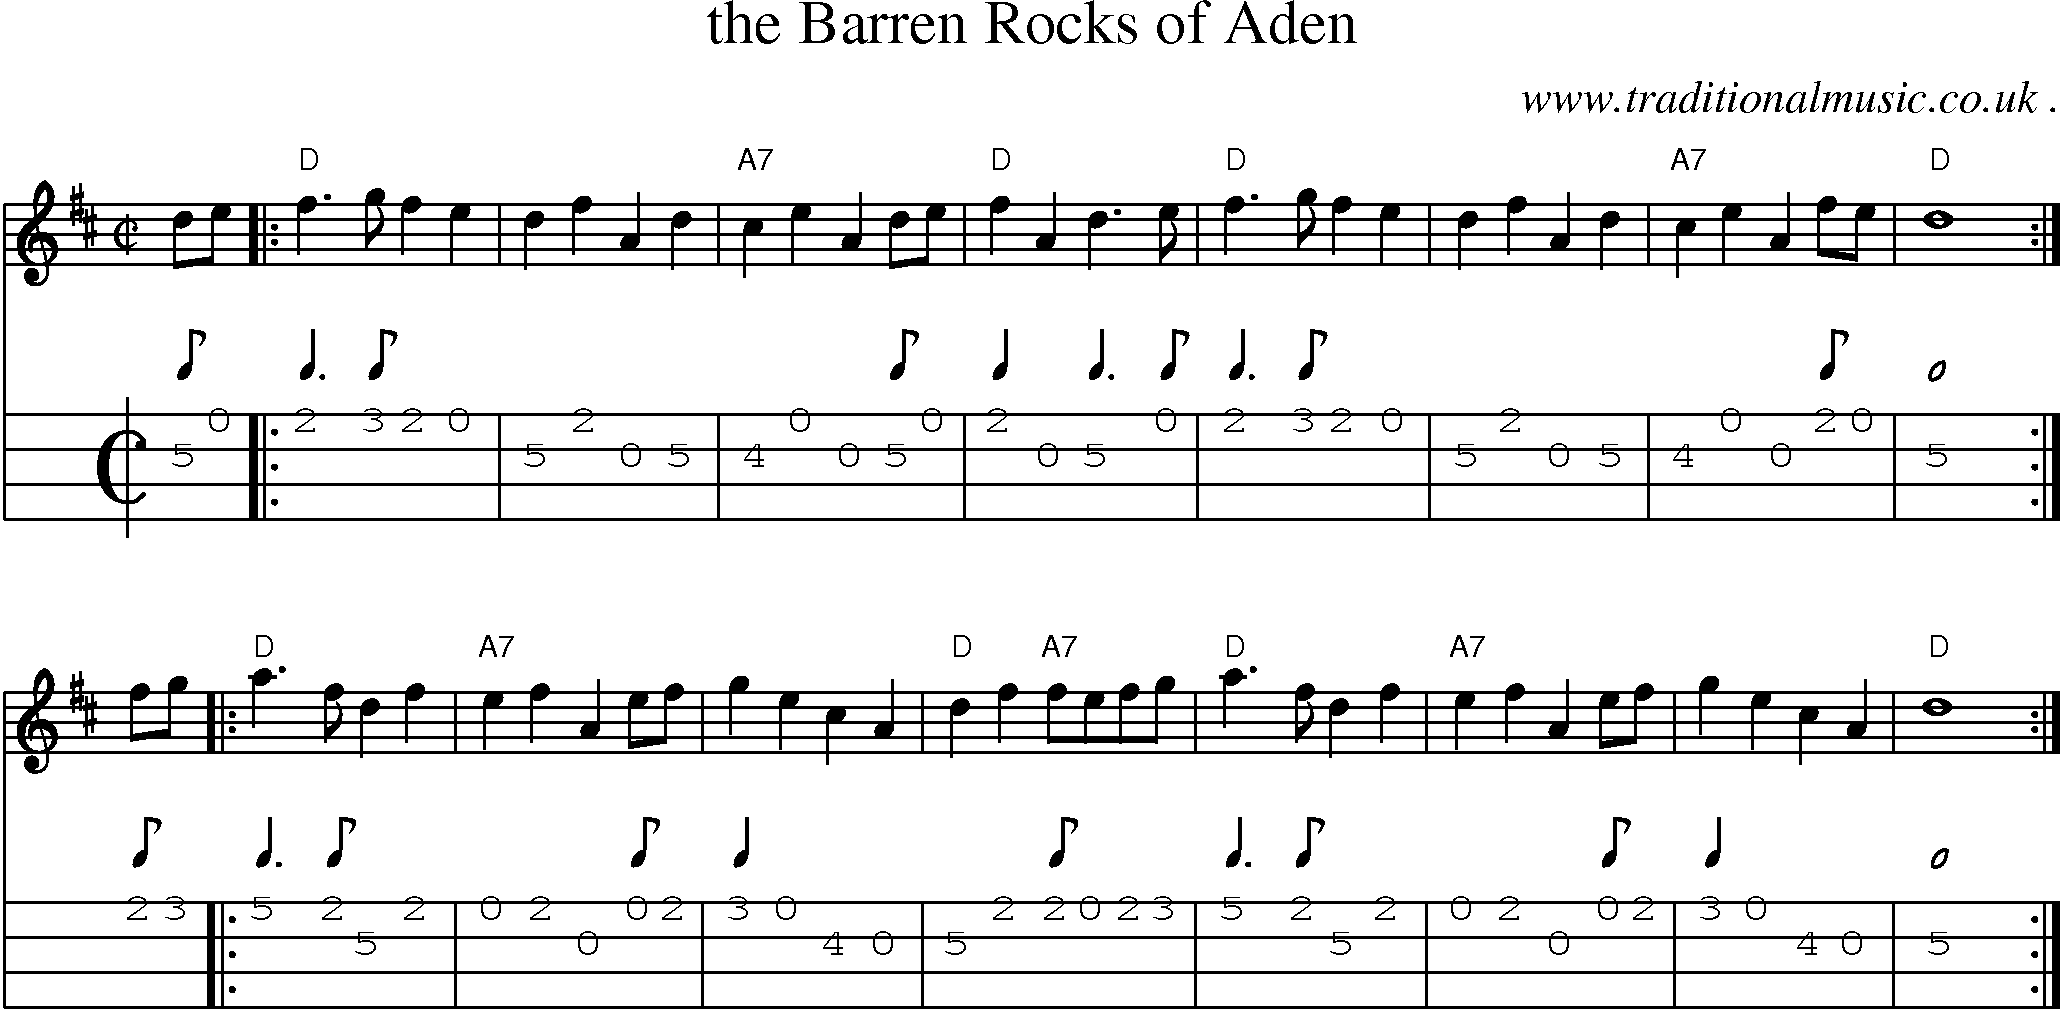 Sheet-music  score, Chords and Mandolin Tabs for The Barren Rocks Of Aden